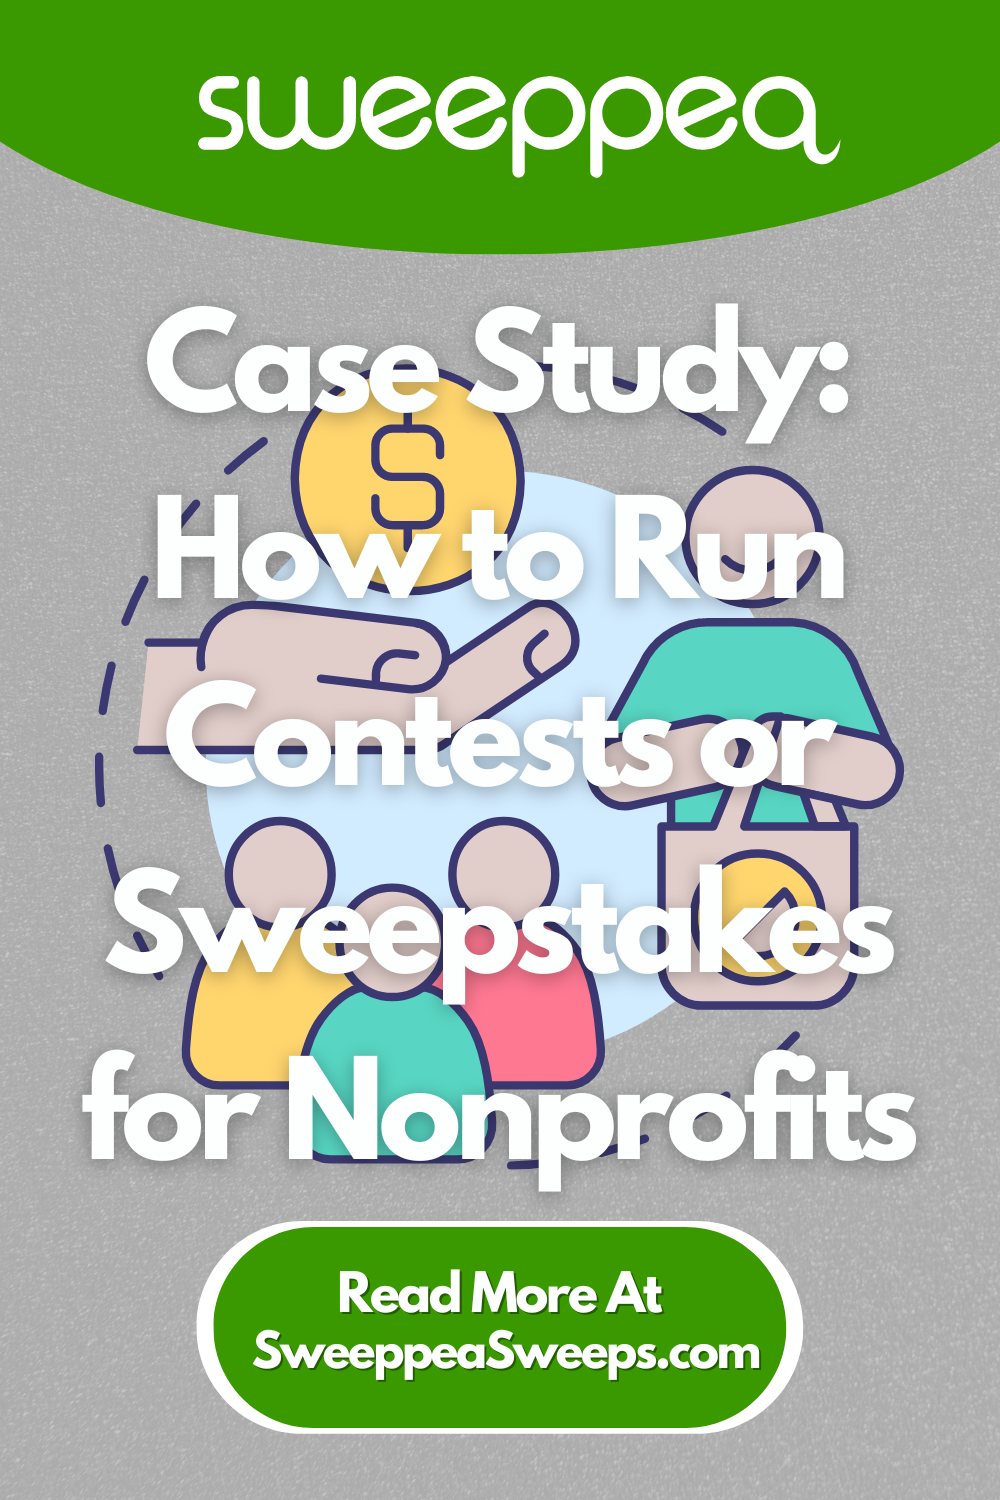 Case-Study-How-to-Run-Contests-or-Sweepstakes-for-Nonprofits-1